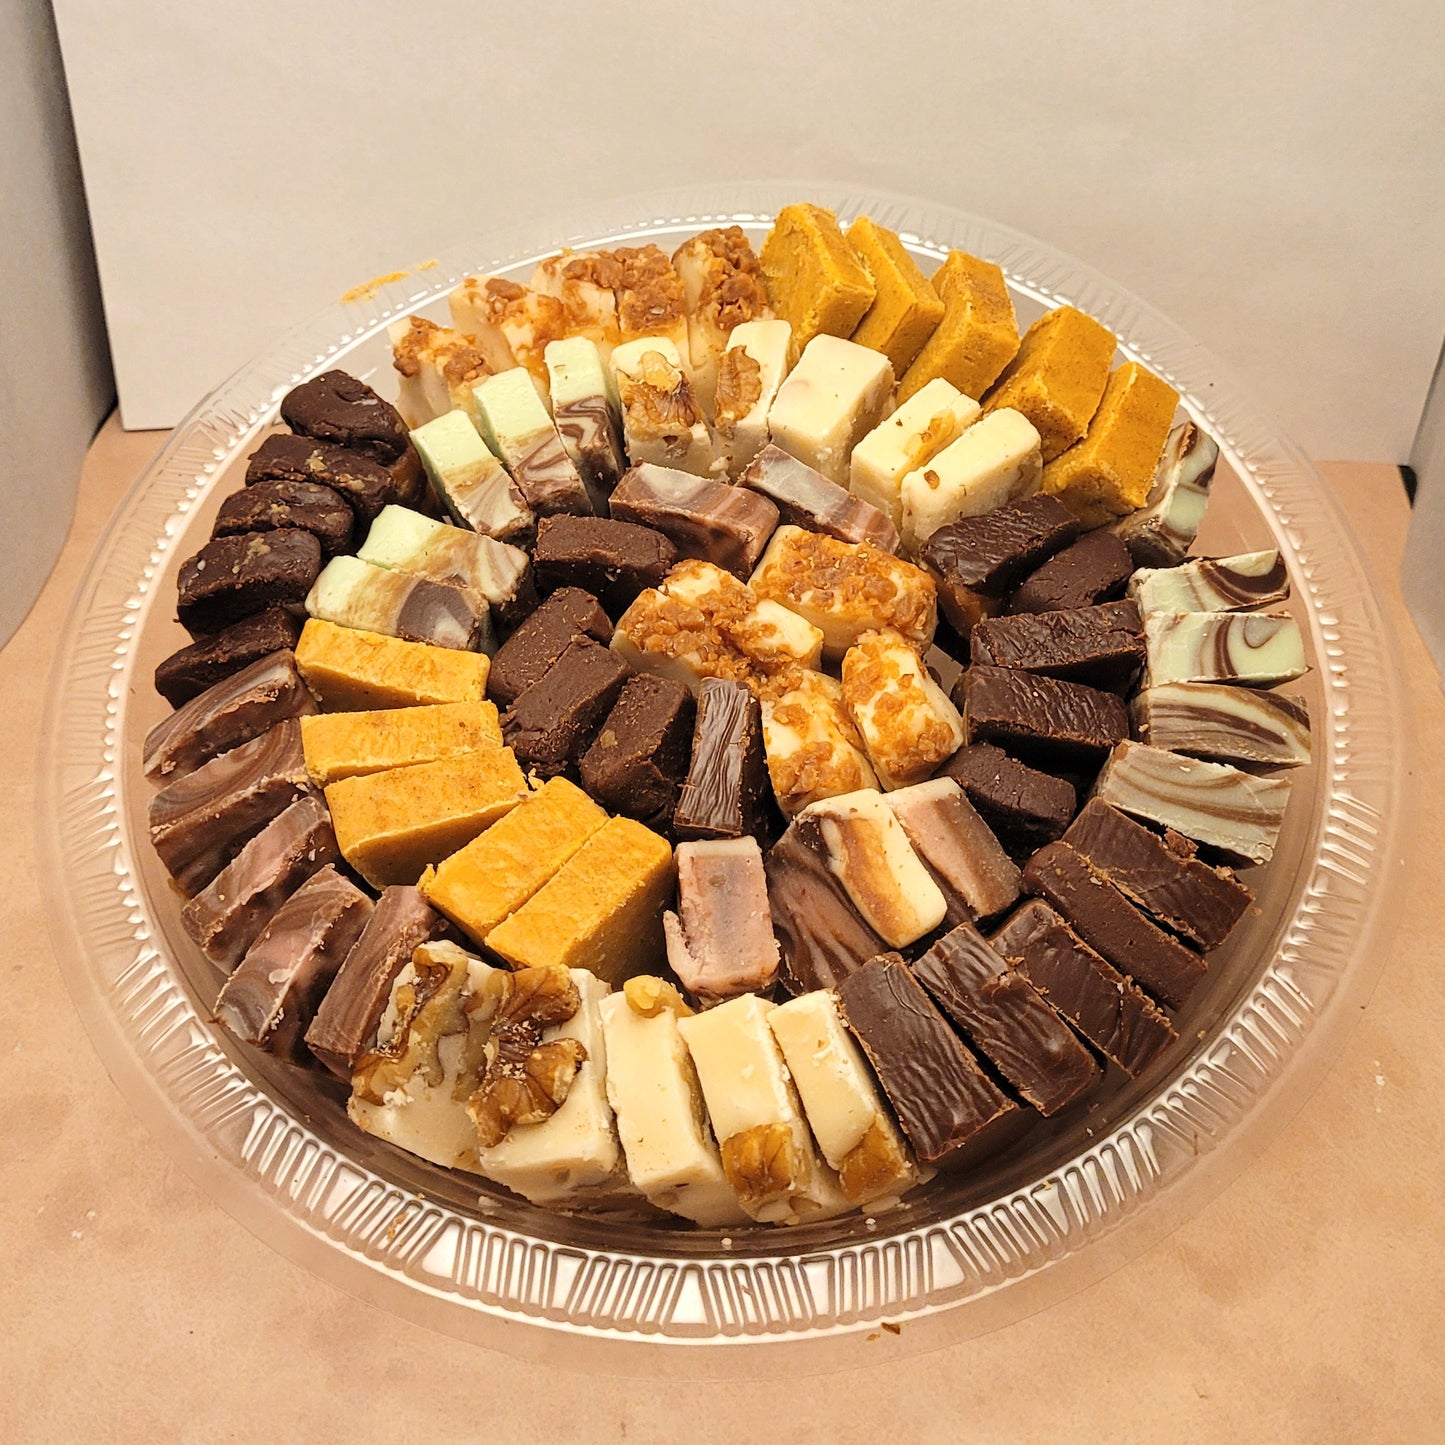 Fudge Party Platter - 7 Flavors of Smooth and Creamy Fudge in Bite-Size Pieces